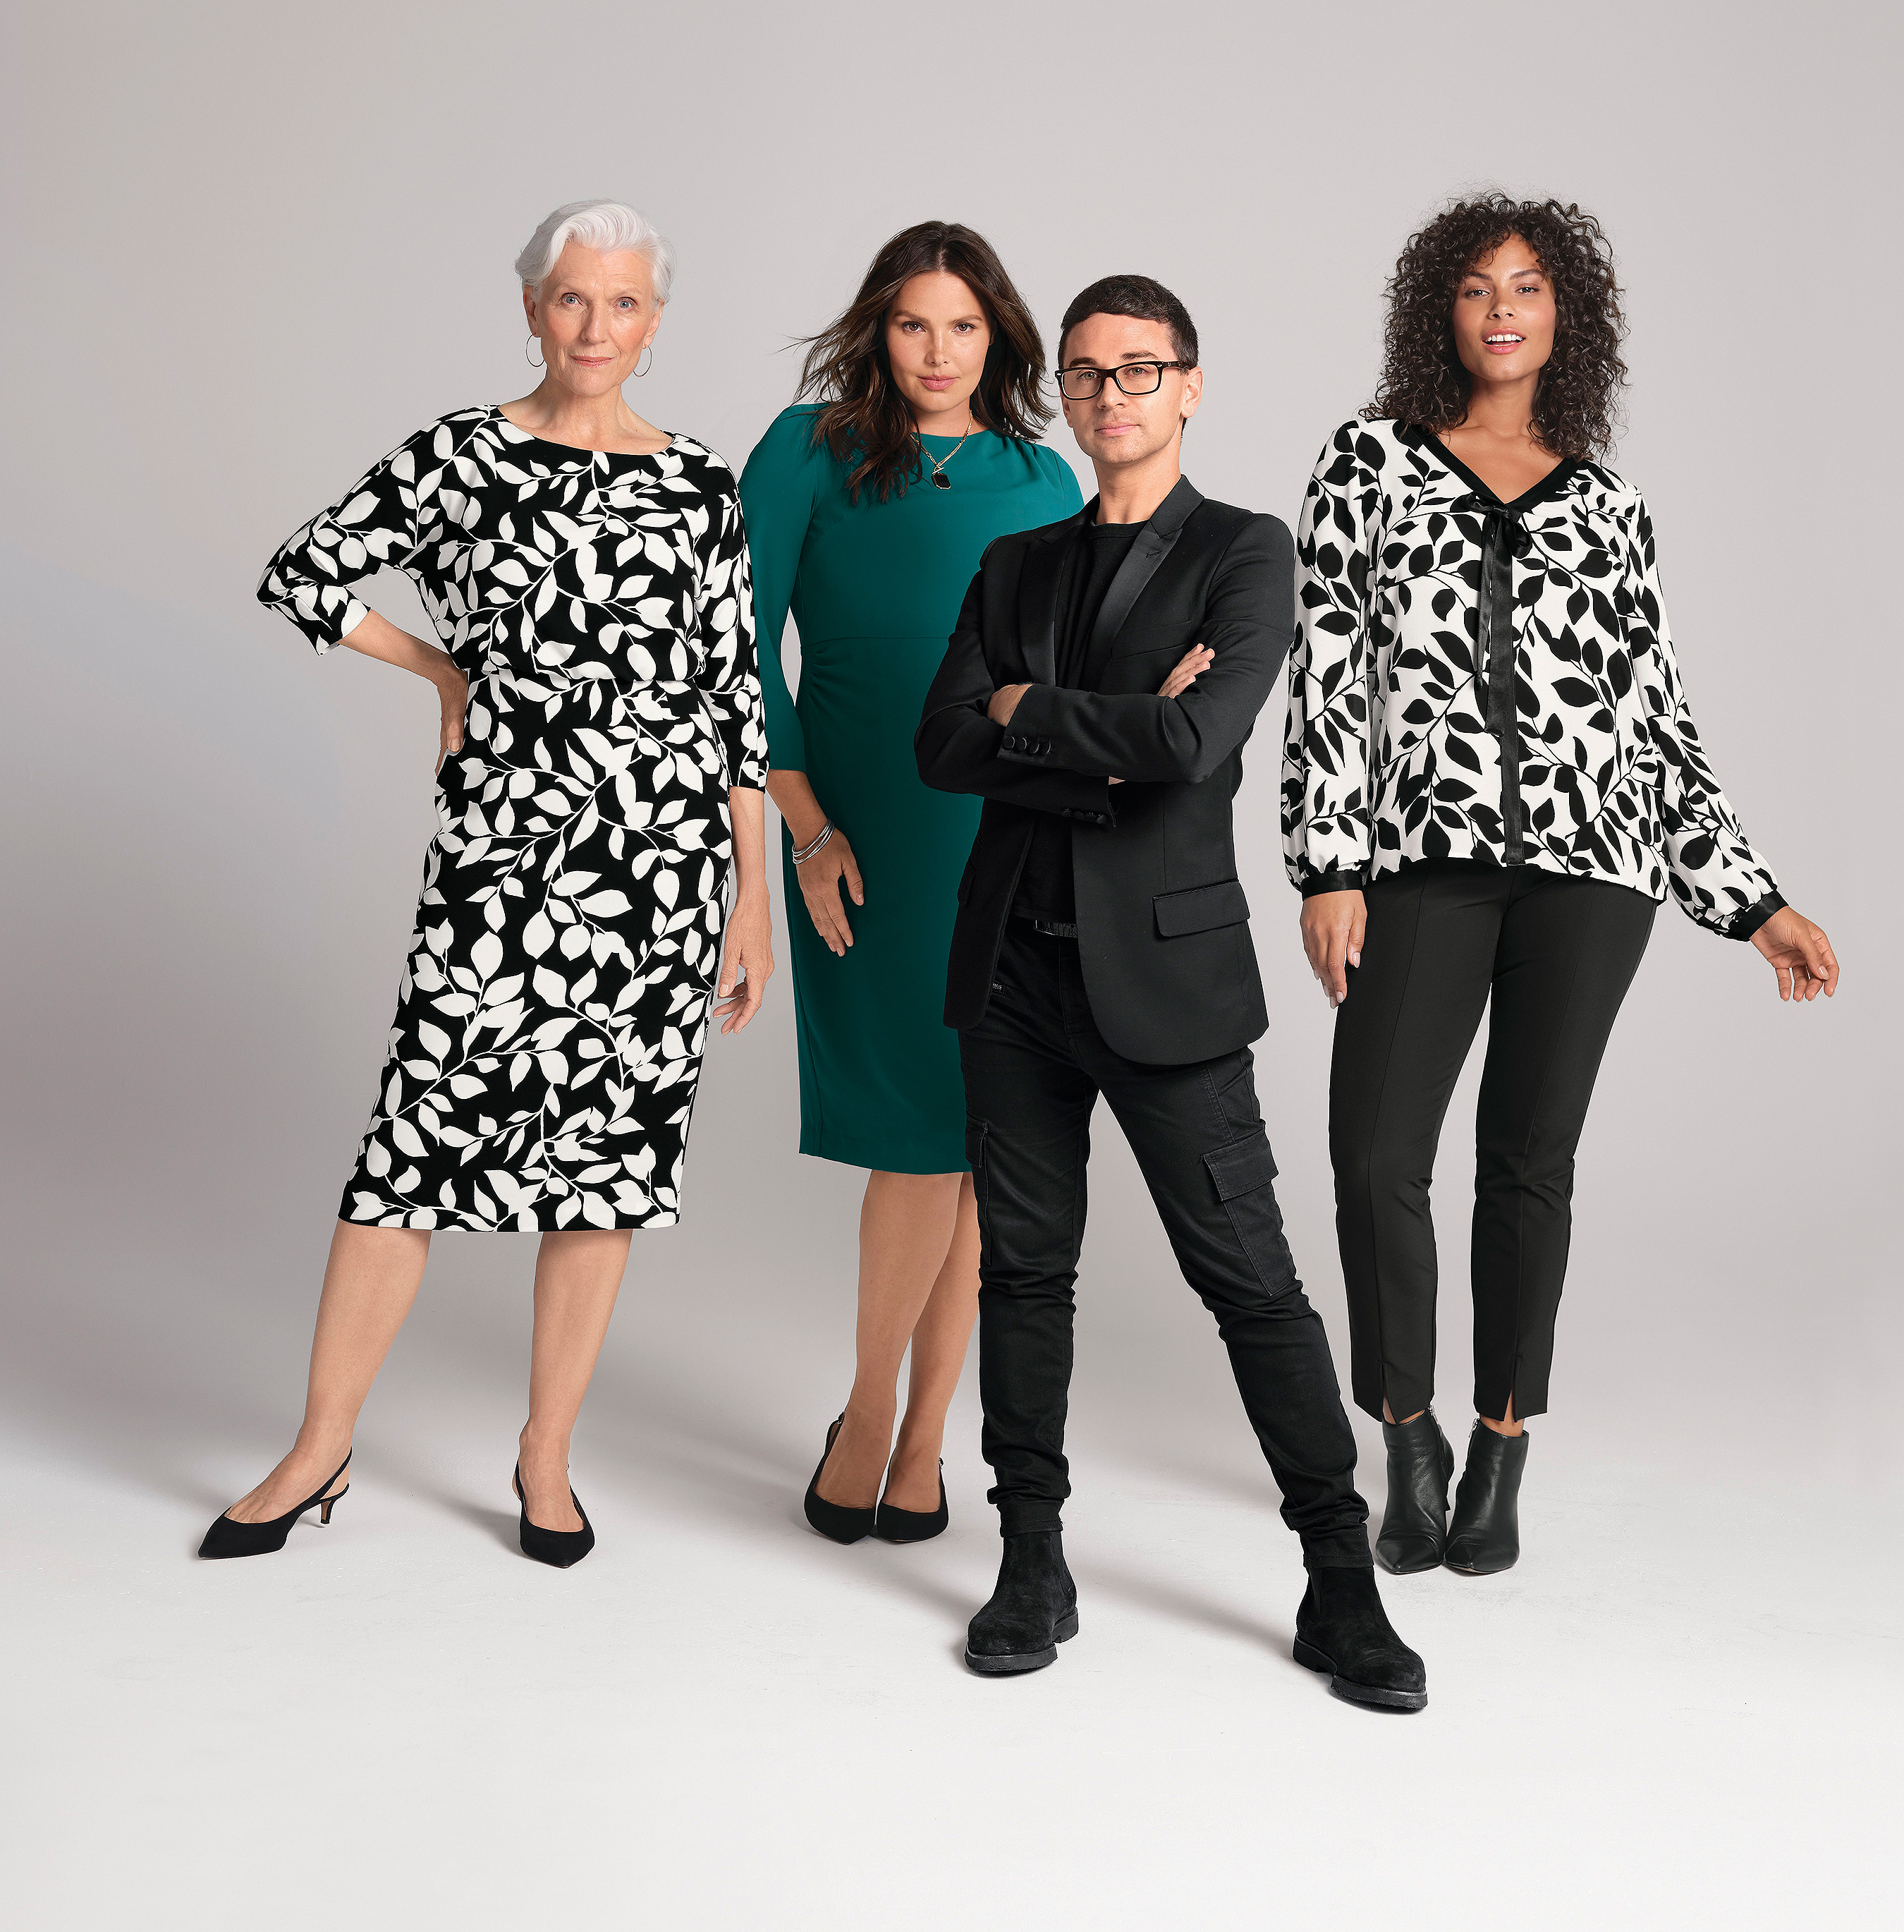 christian siriano x j jill limited edition collection